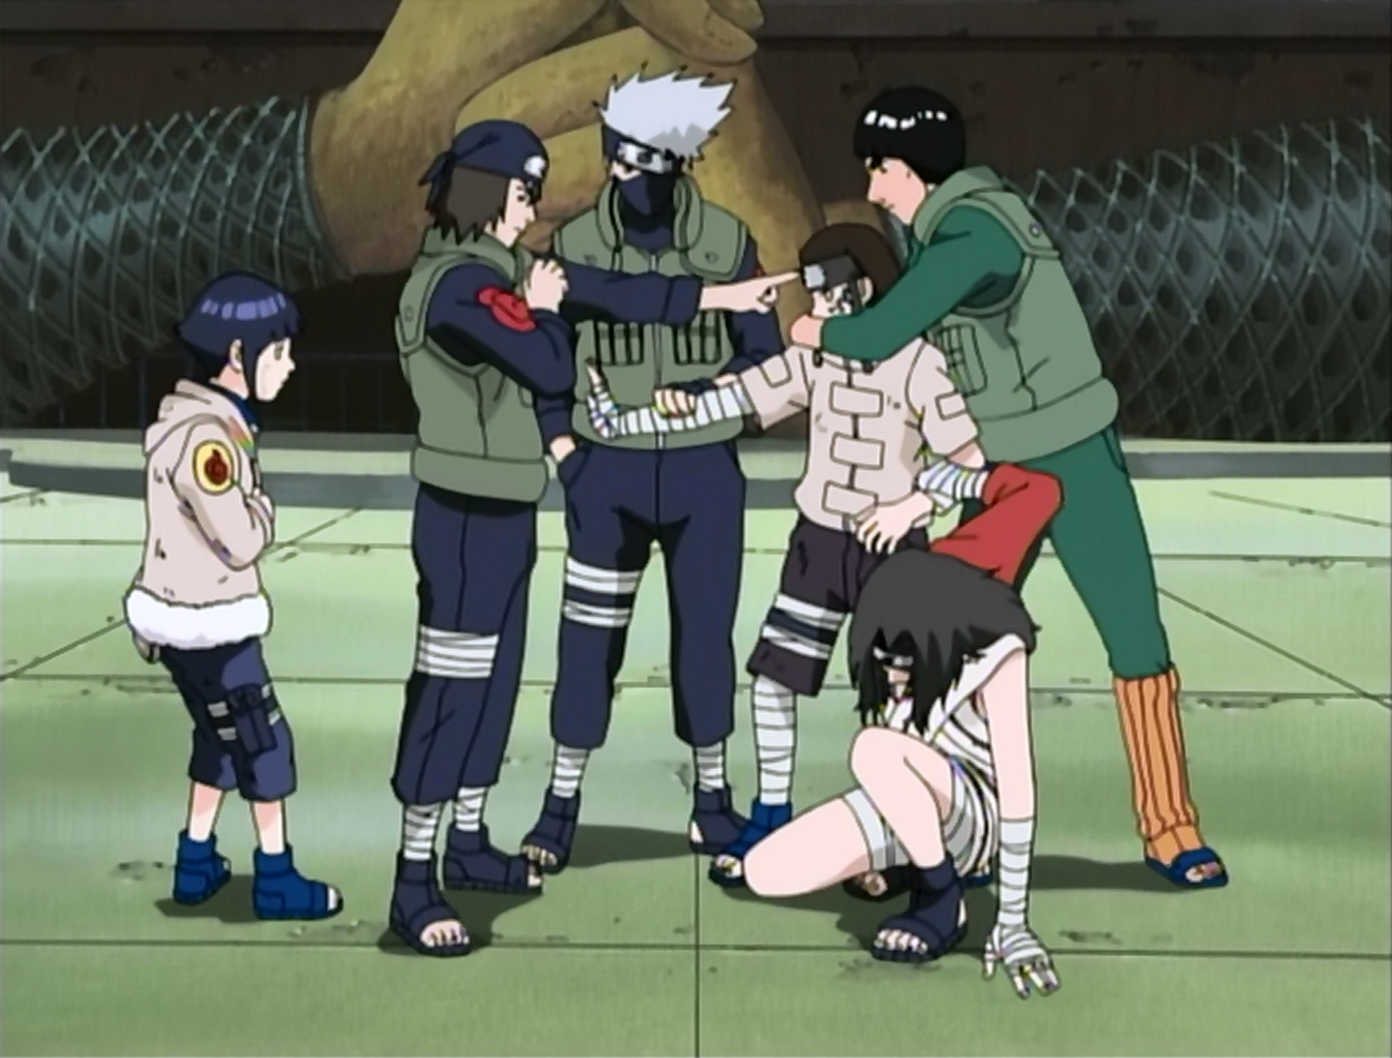 http://images4.wikia.nocookie.net/__cb20120528160813/naruto/images/8/8a/Episode_47.png